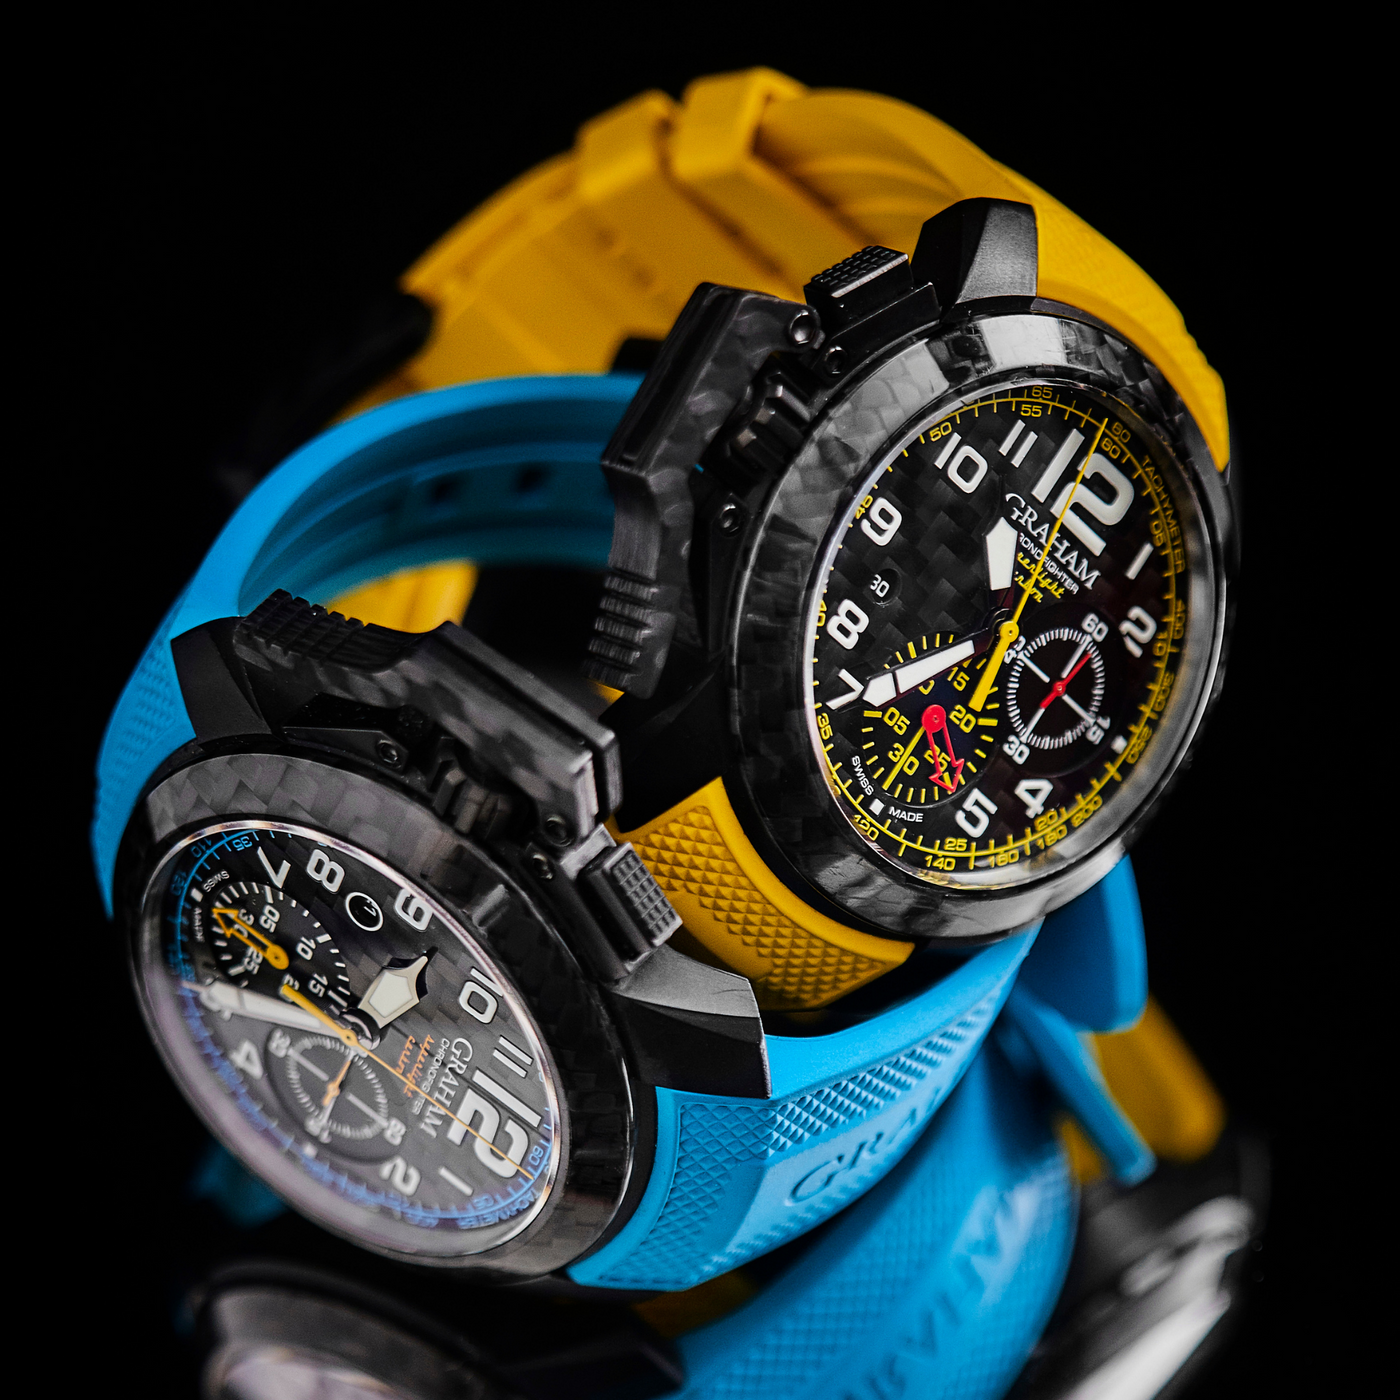 CHRONOFIGHTER SUPERLIGHT CARBON (YELLOW)